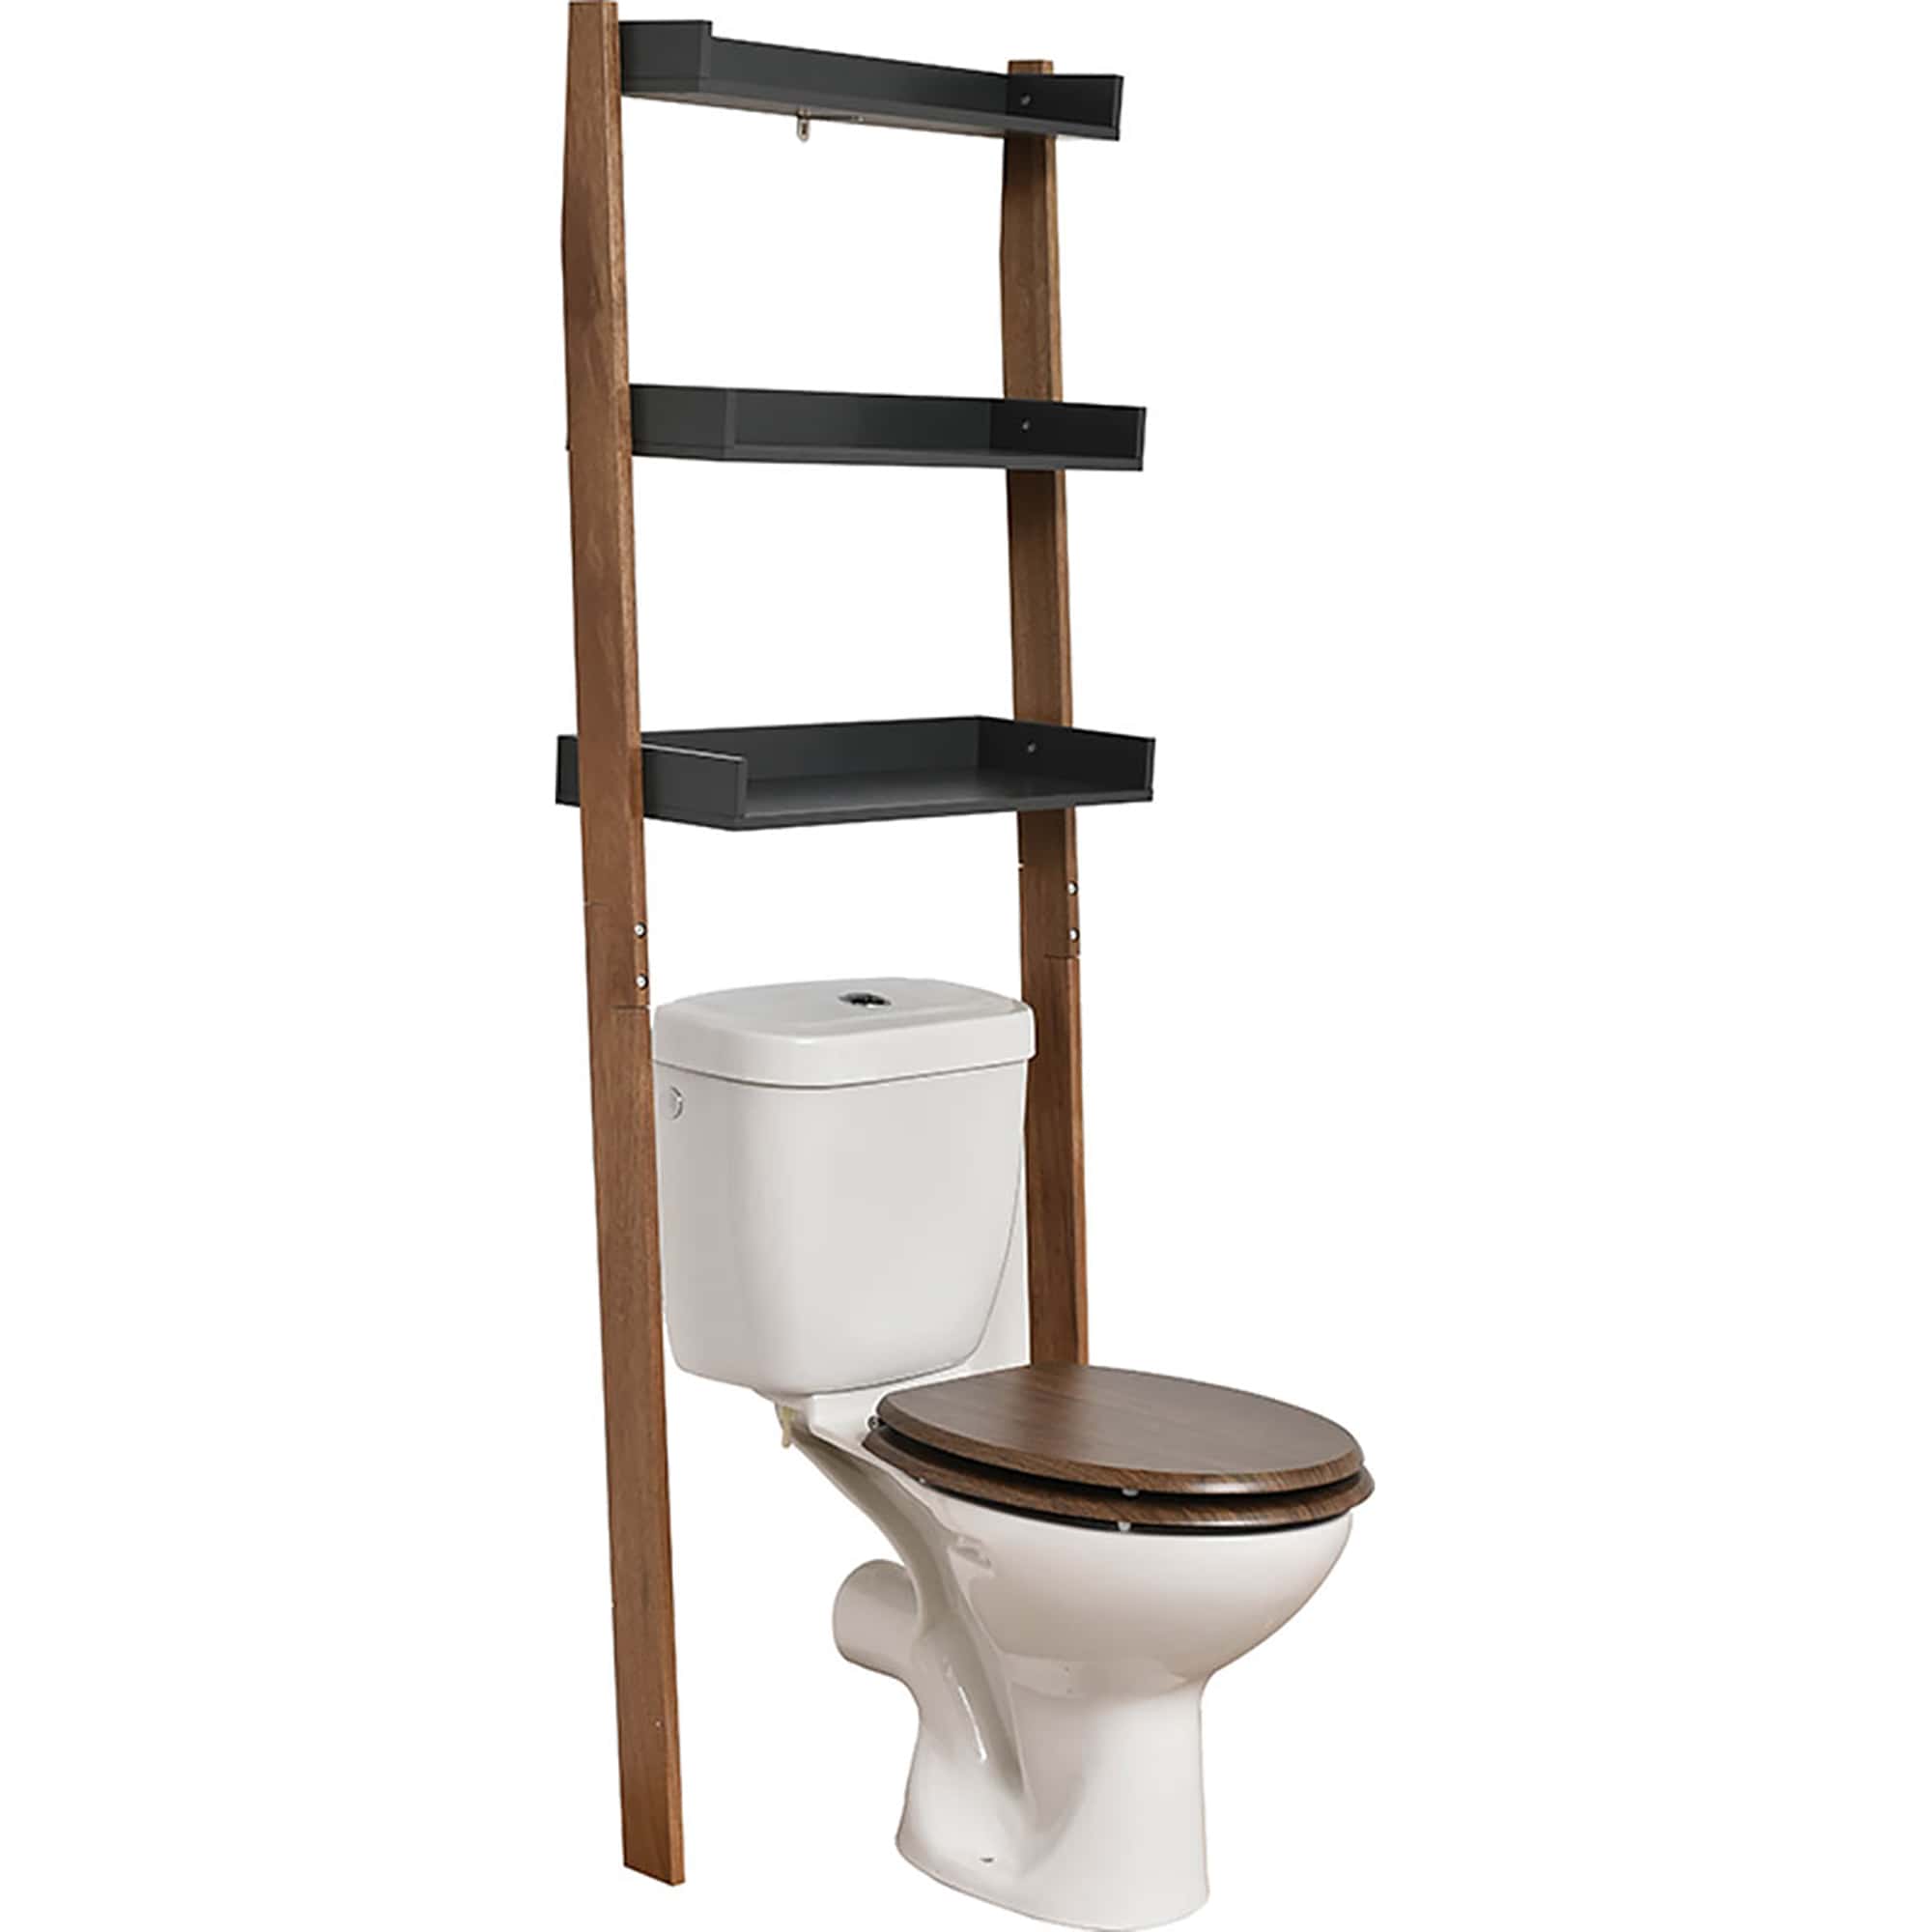 EVIDECO Mahe Free Standing Over The Toilet Space Saver Cabinet Bamboo 